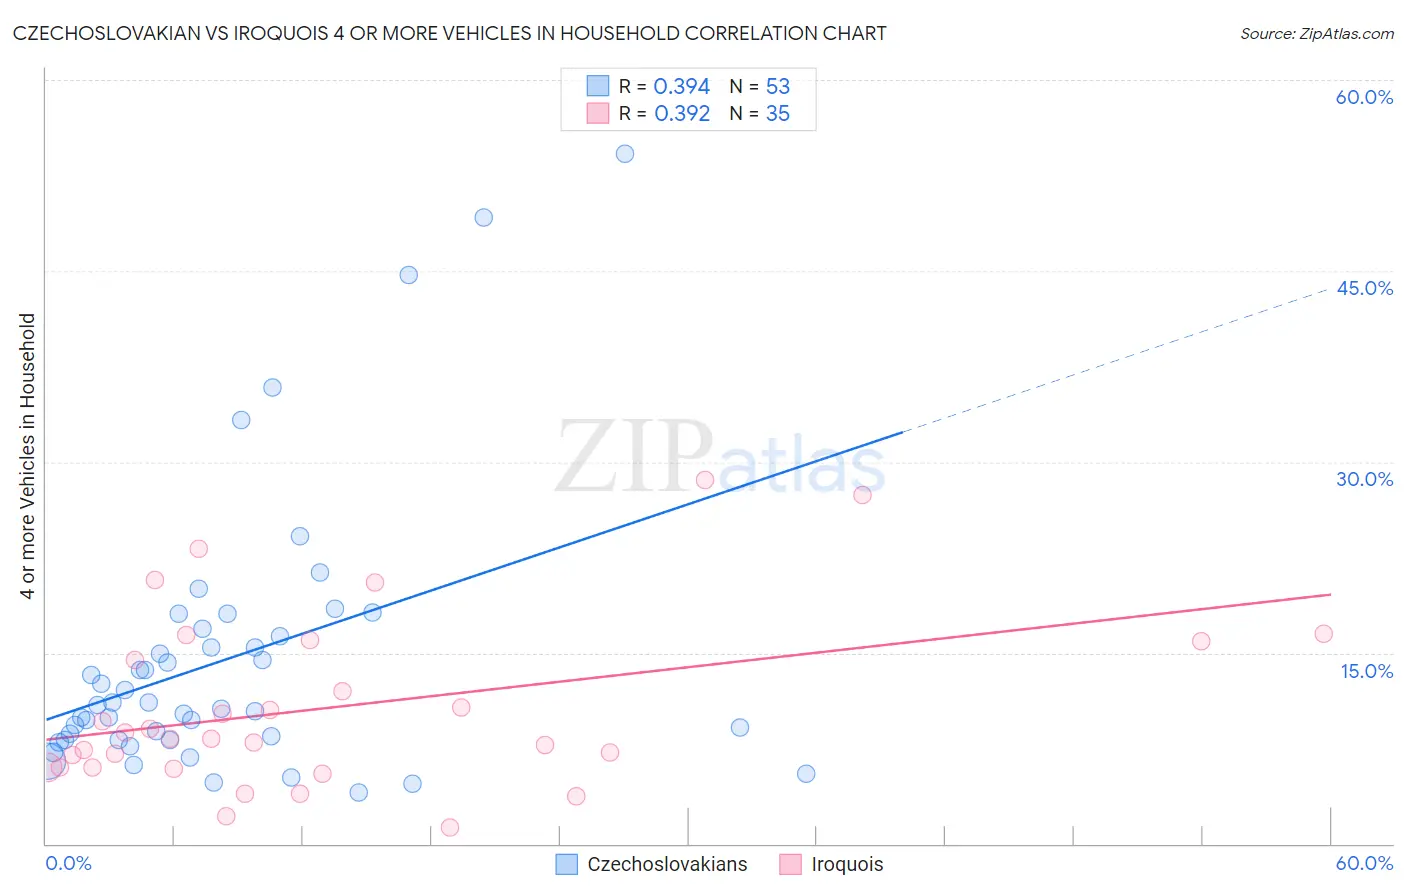 Czechoslovakian vs Iroquois 4 or more Vehicles in Household